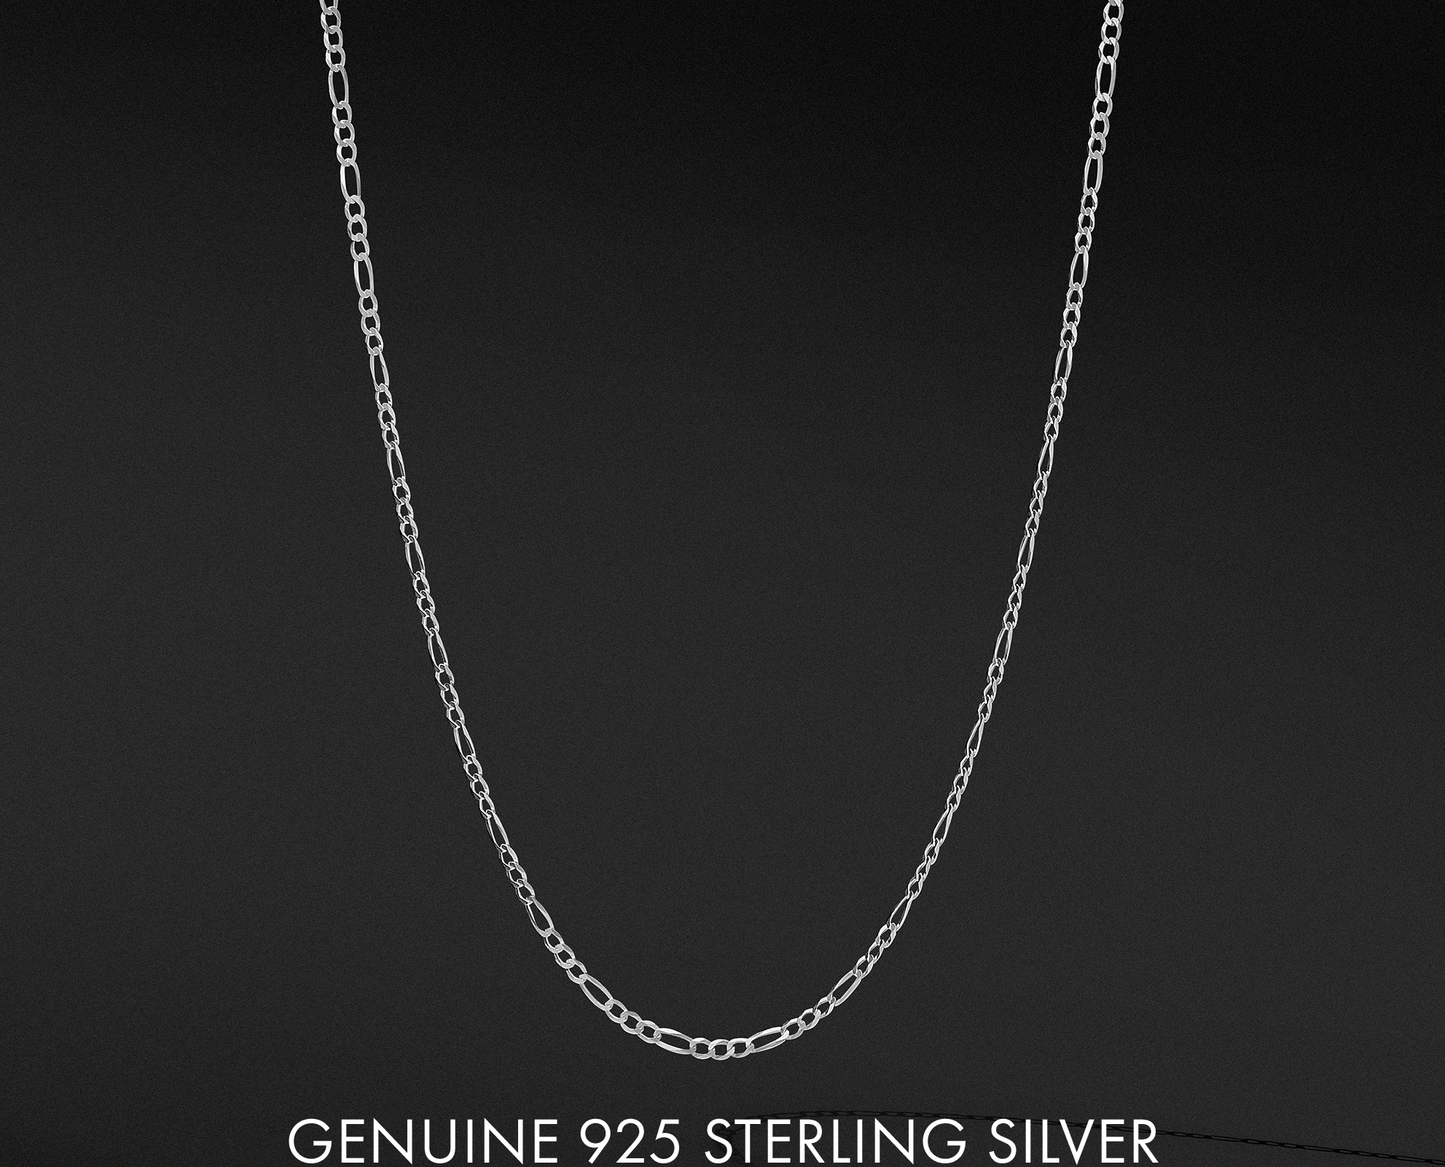 Authentic 925 Sterling Silver 5MM Figaro Link Chain Necklaces, Solid 925 Italy